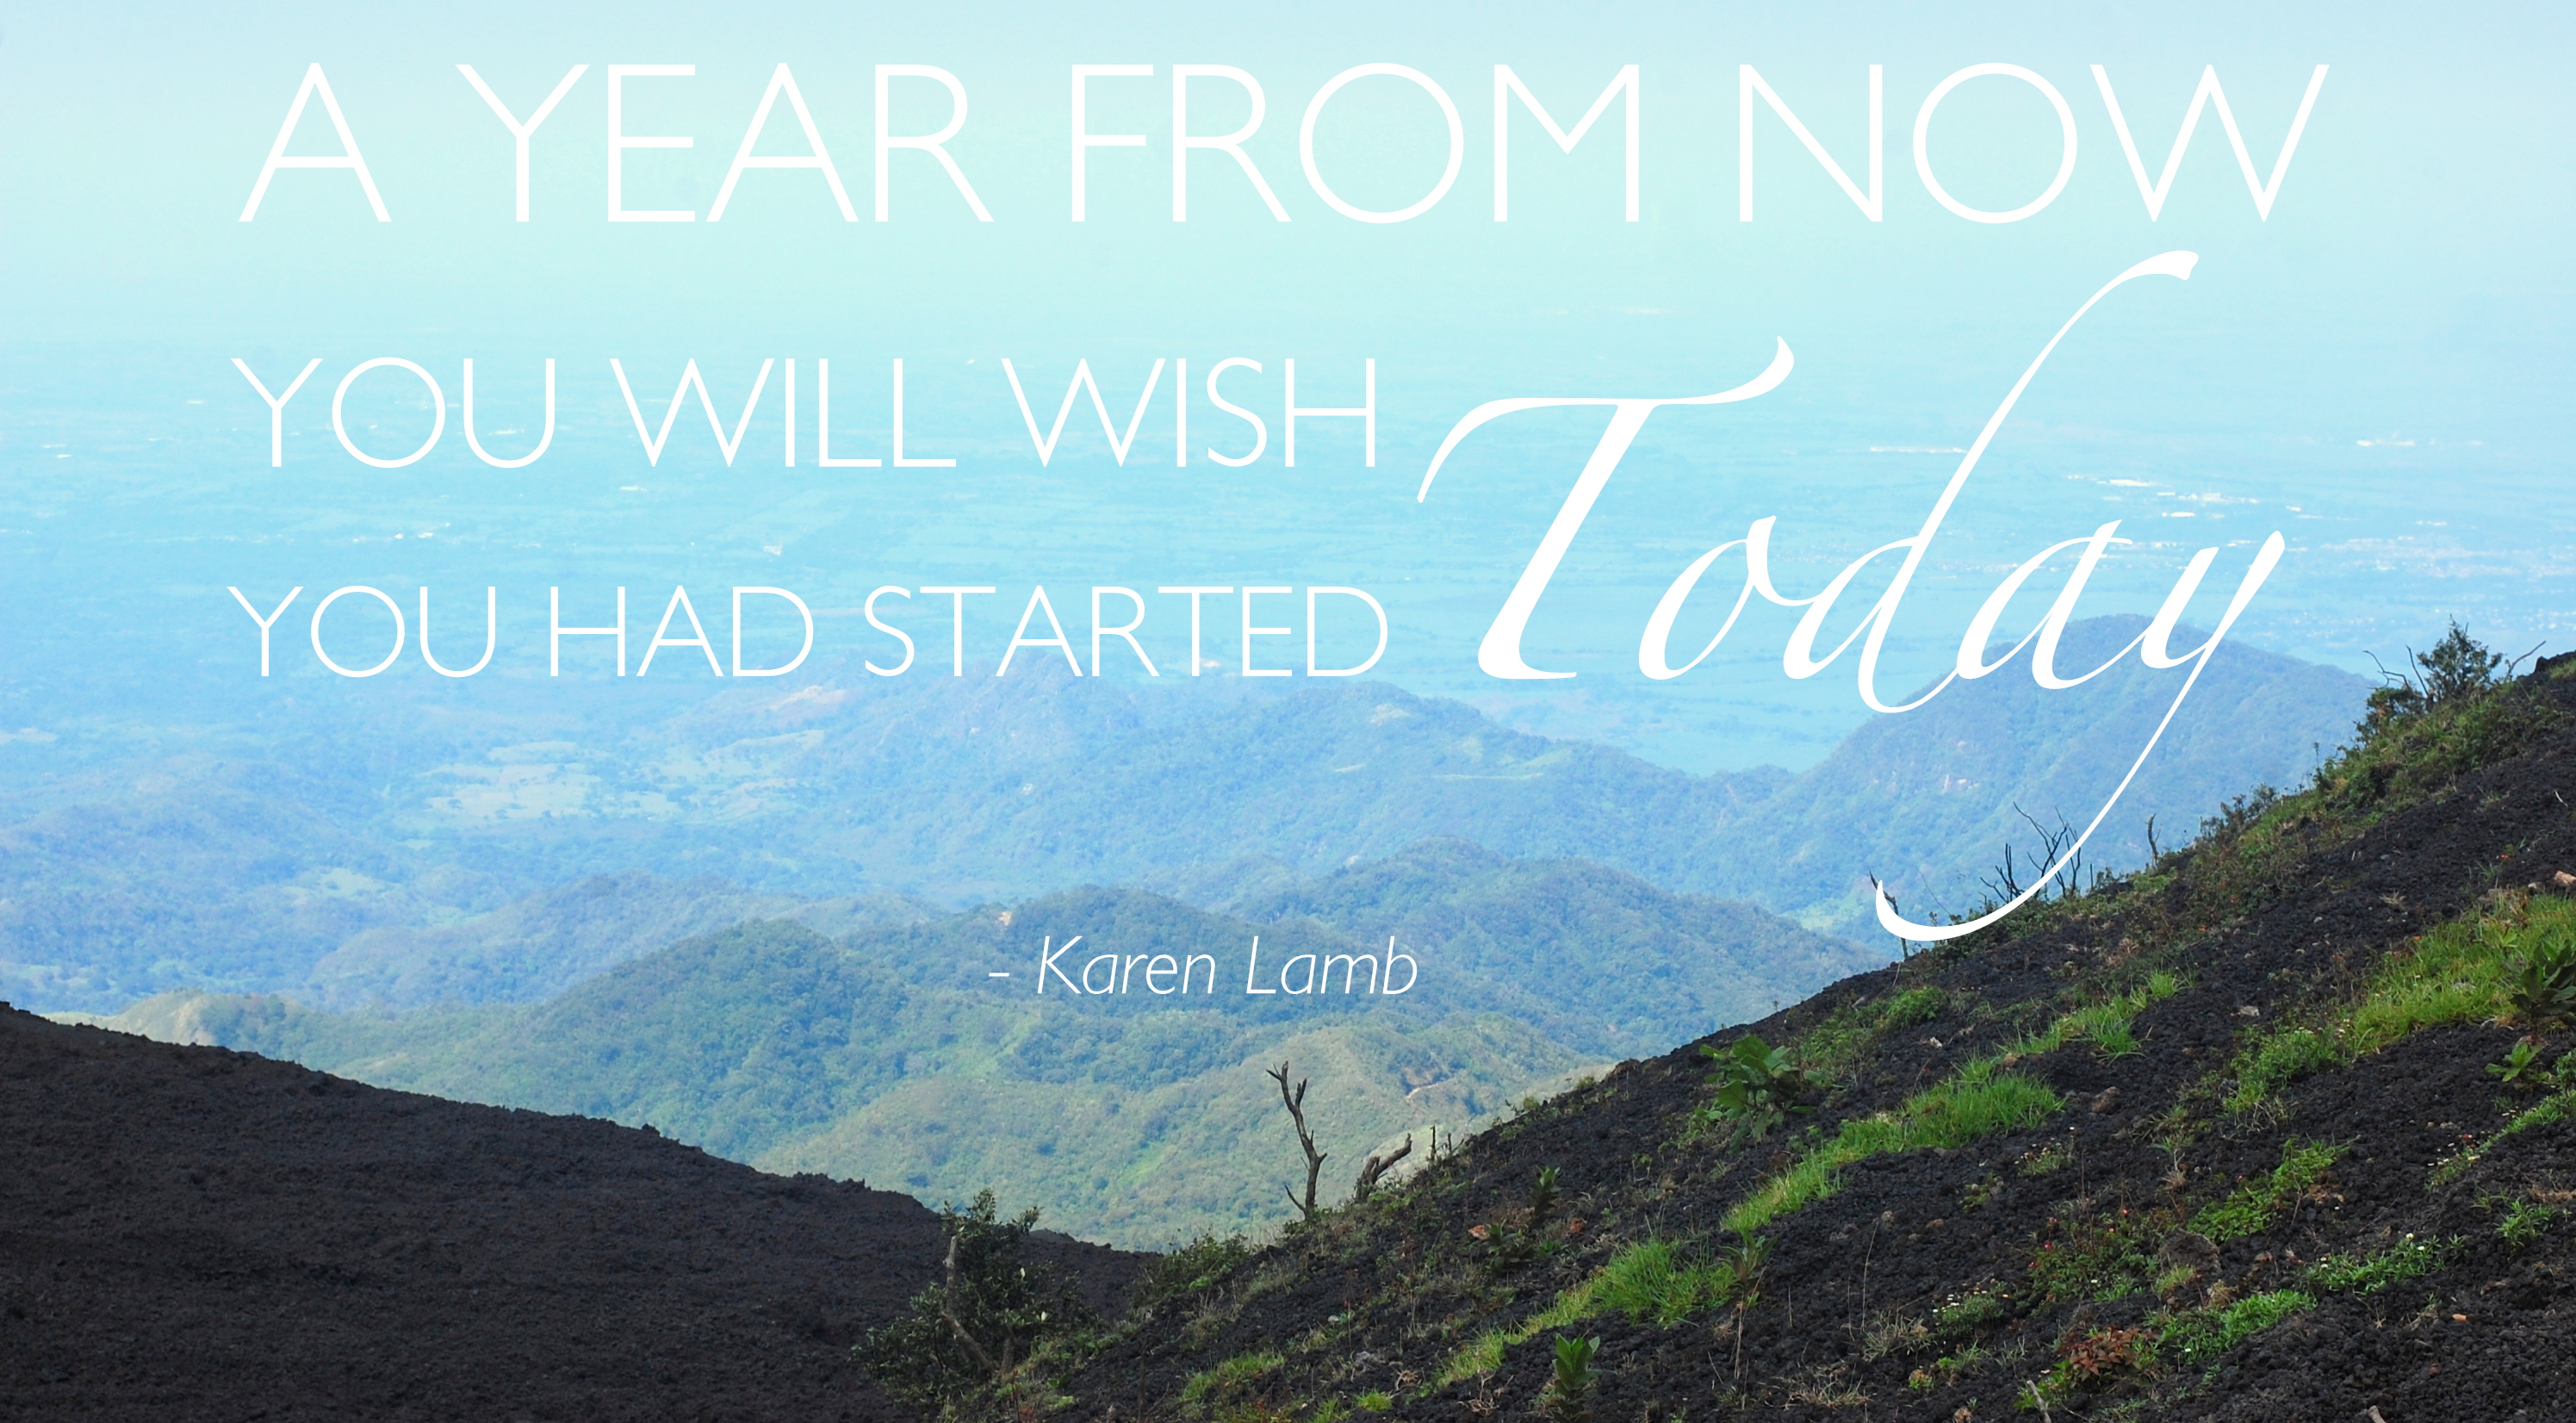 A year from now you will wish you had started today